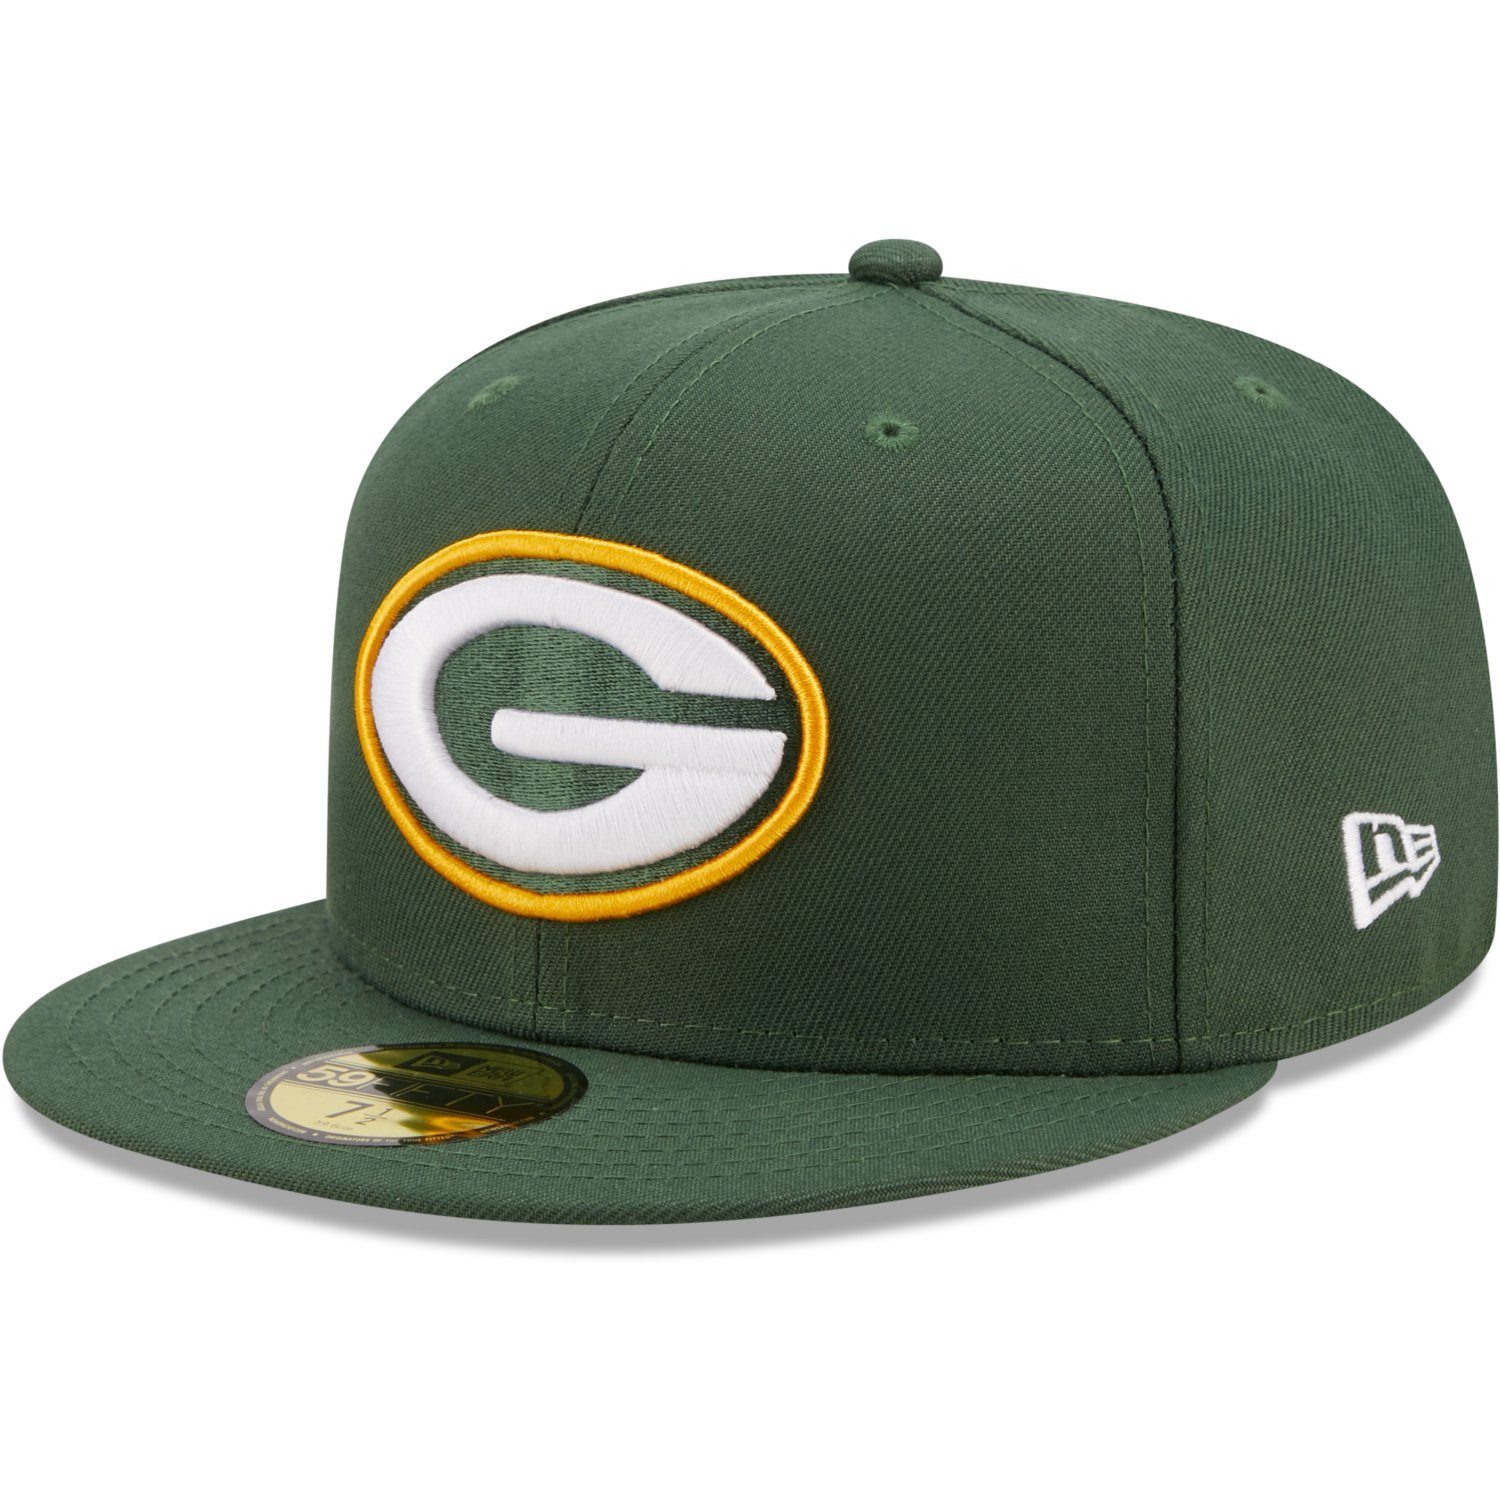 59Fifty Green Era Fitted SIDE Bay PATCH Cap New Packers